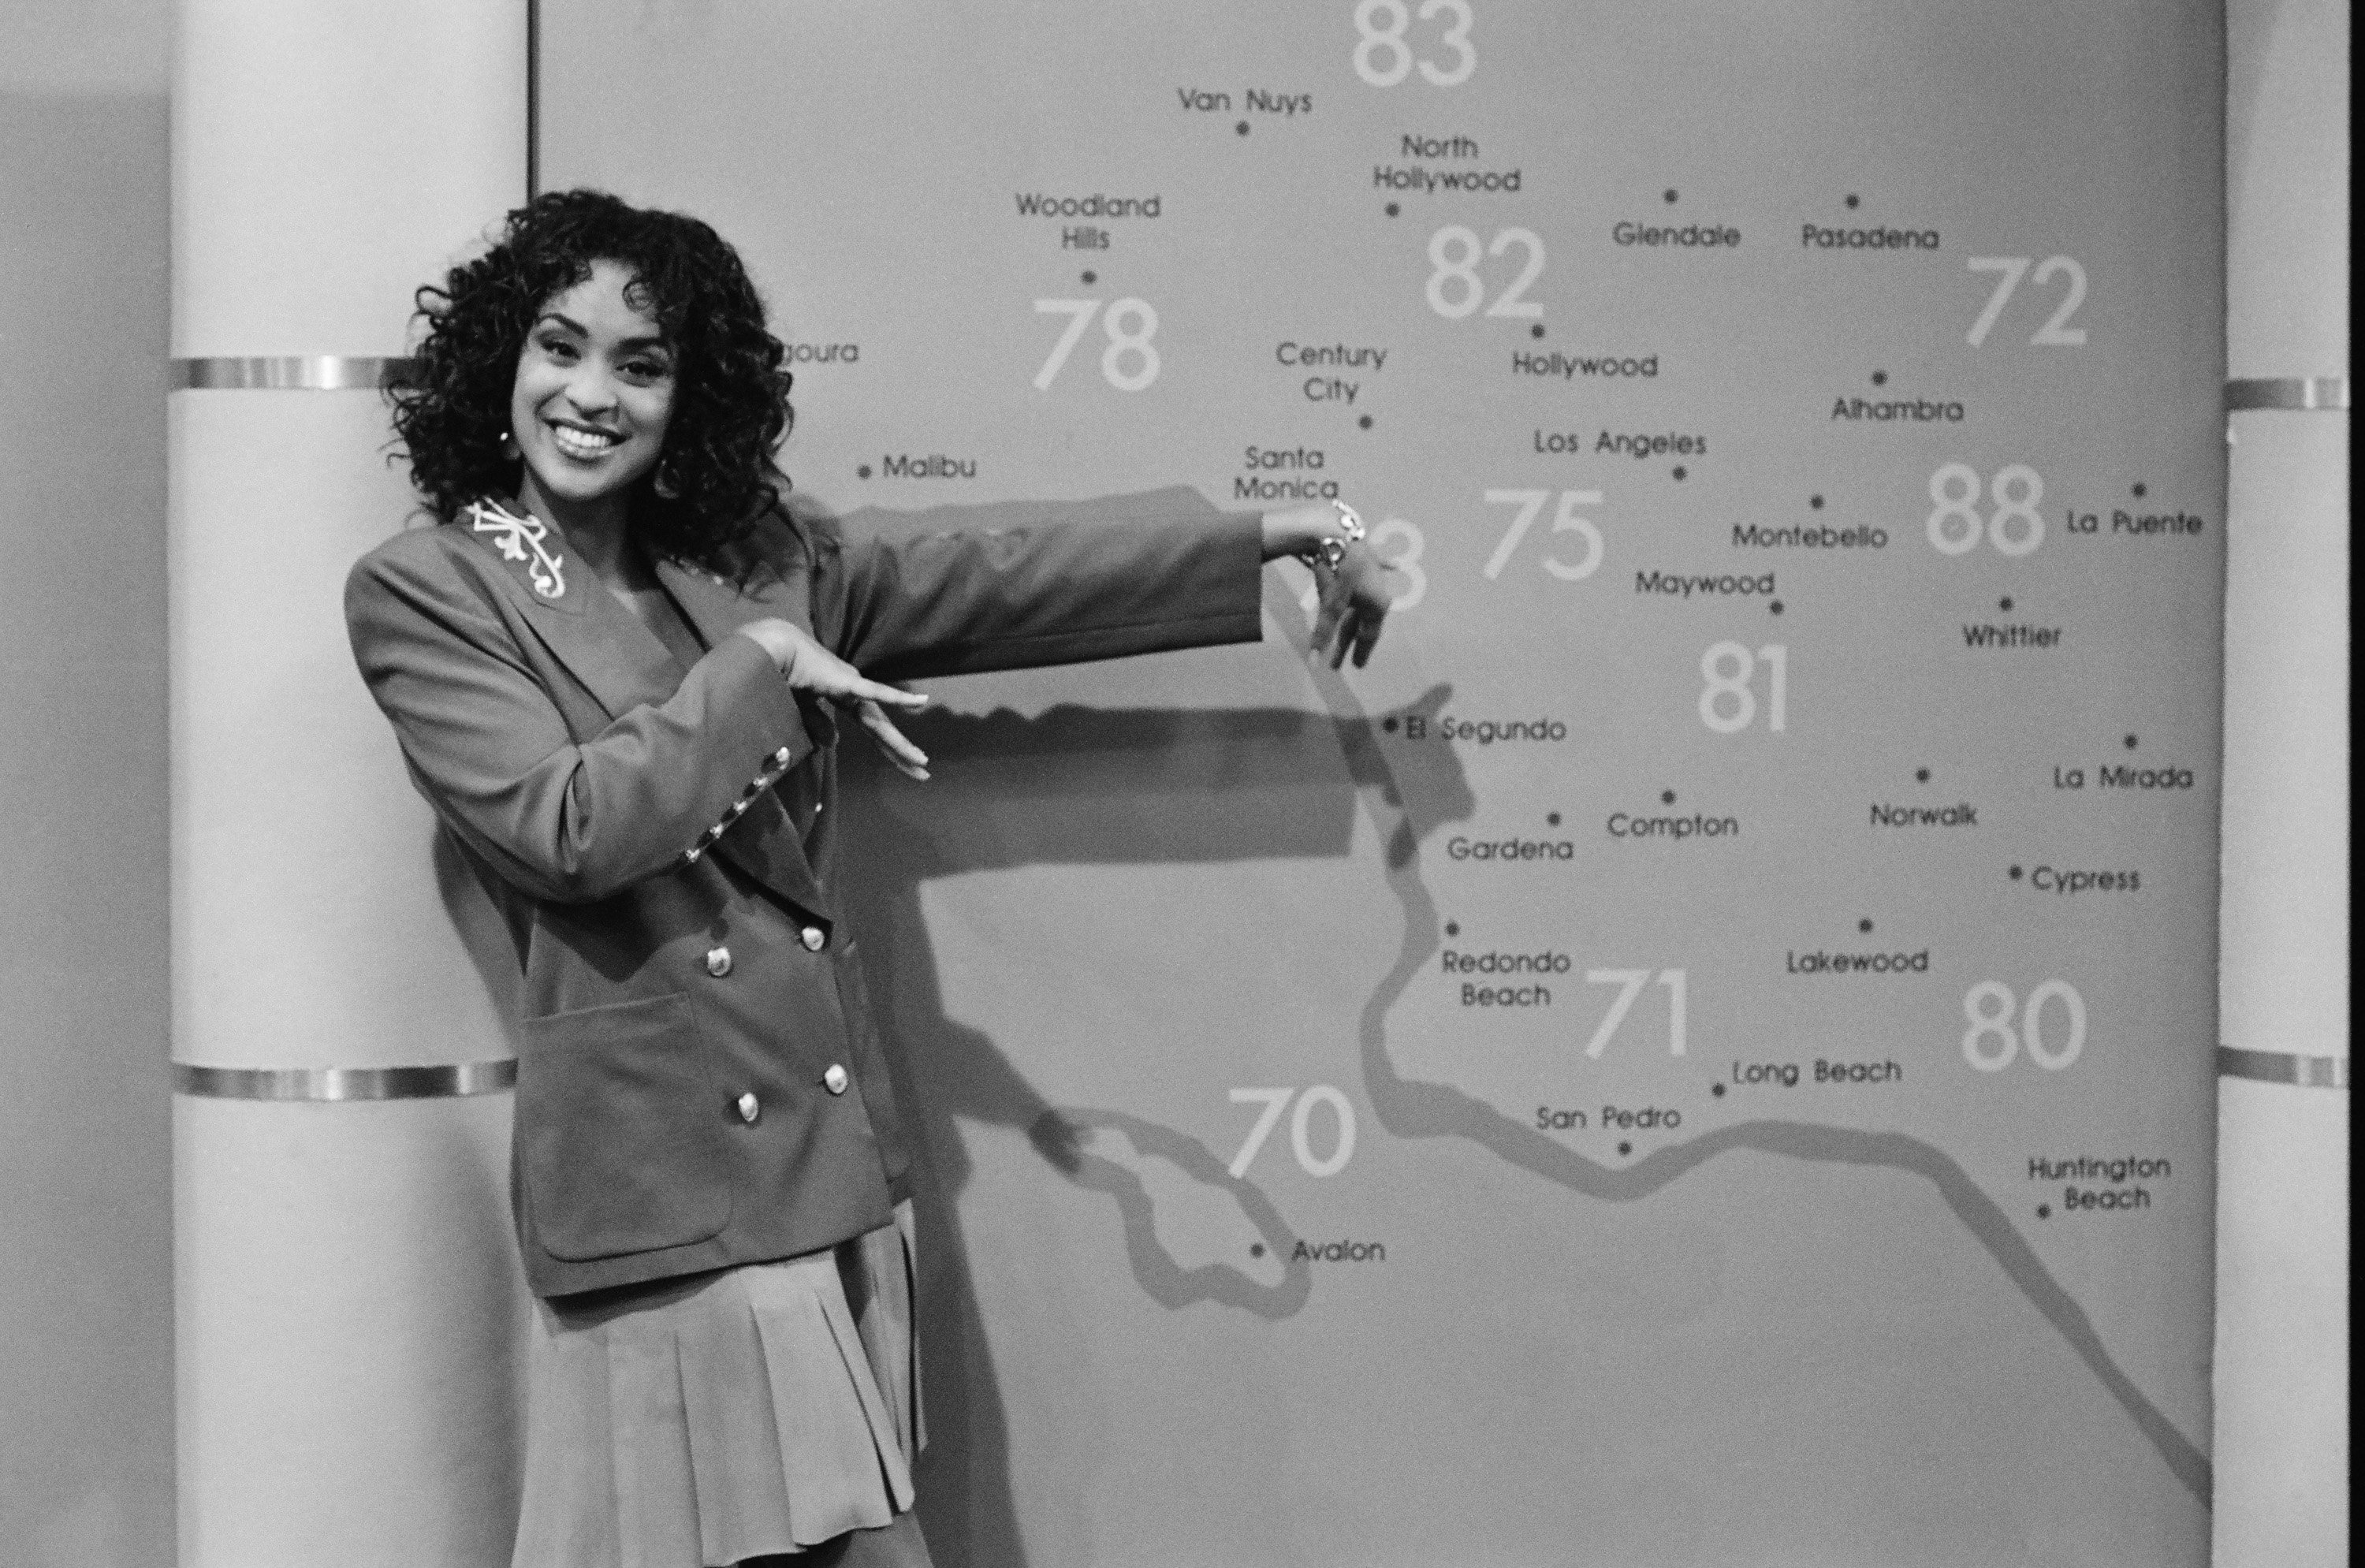 Karyn Parsons as Hilary Banks pointing to a large map during an episode of 'Fresh Prince of Bel-Air'